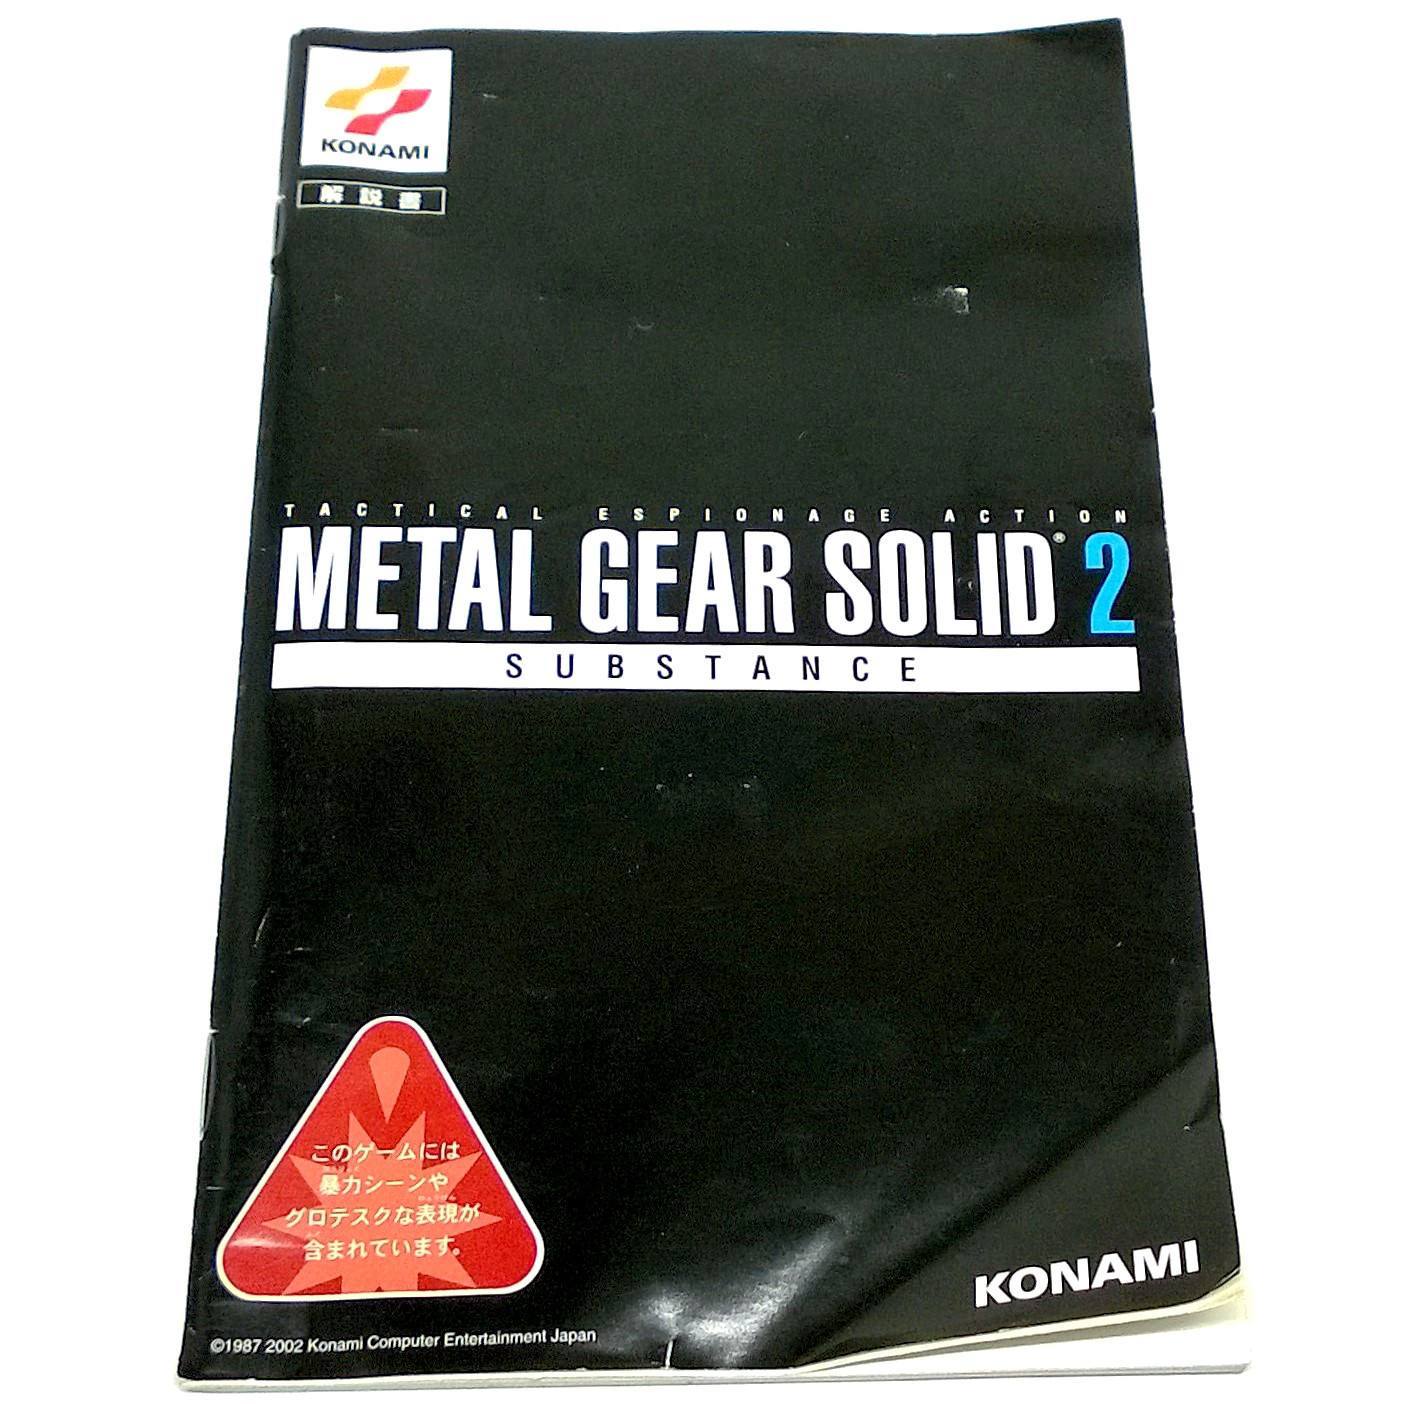 Metal Gear Solid 2: Substance for PlayStation 2 (import) - Front of manual